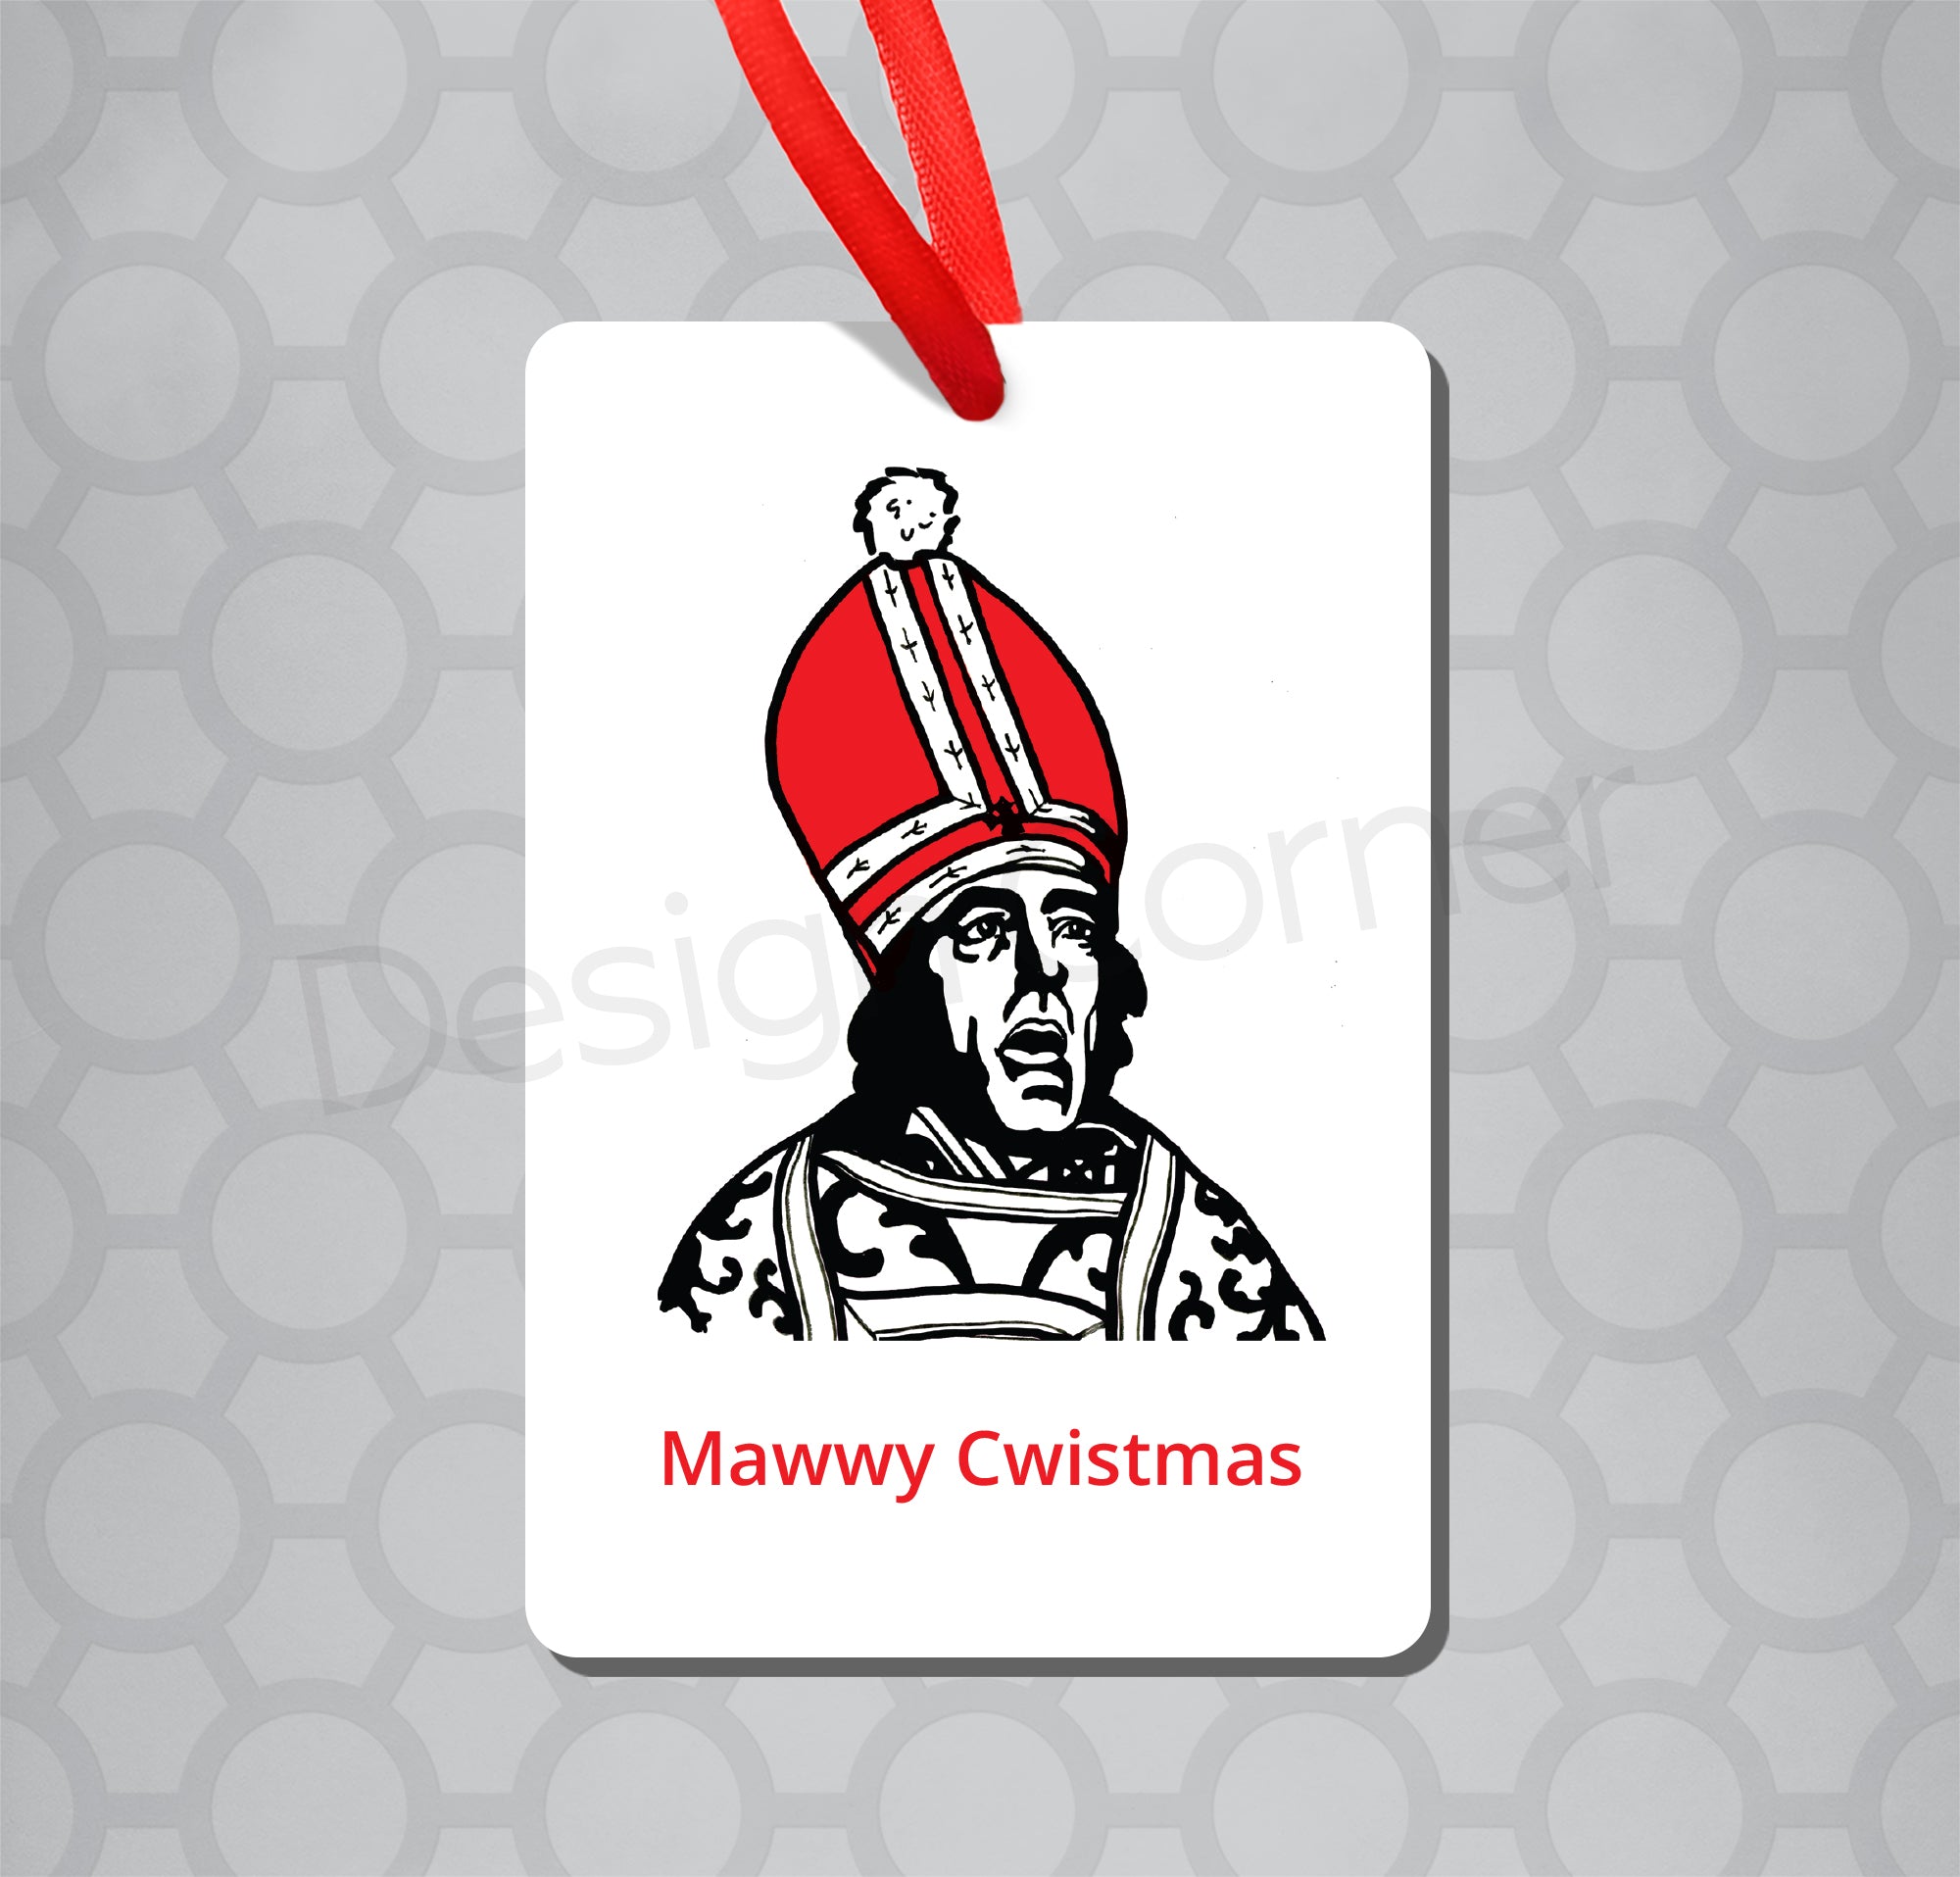 Magnet ornament with illustration of Princess Bride priest with caption "Mawwy Cwistmas"